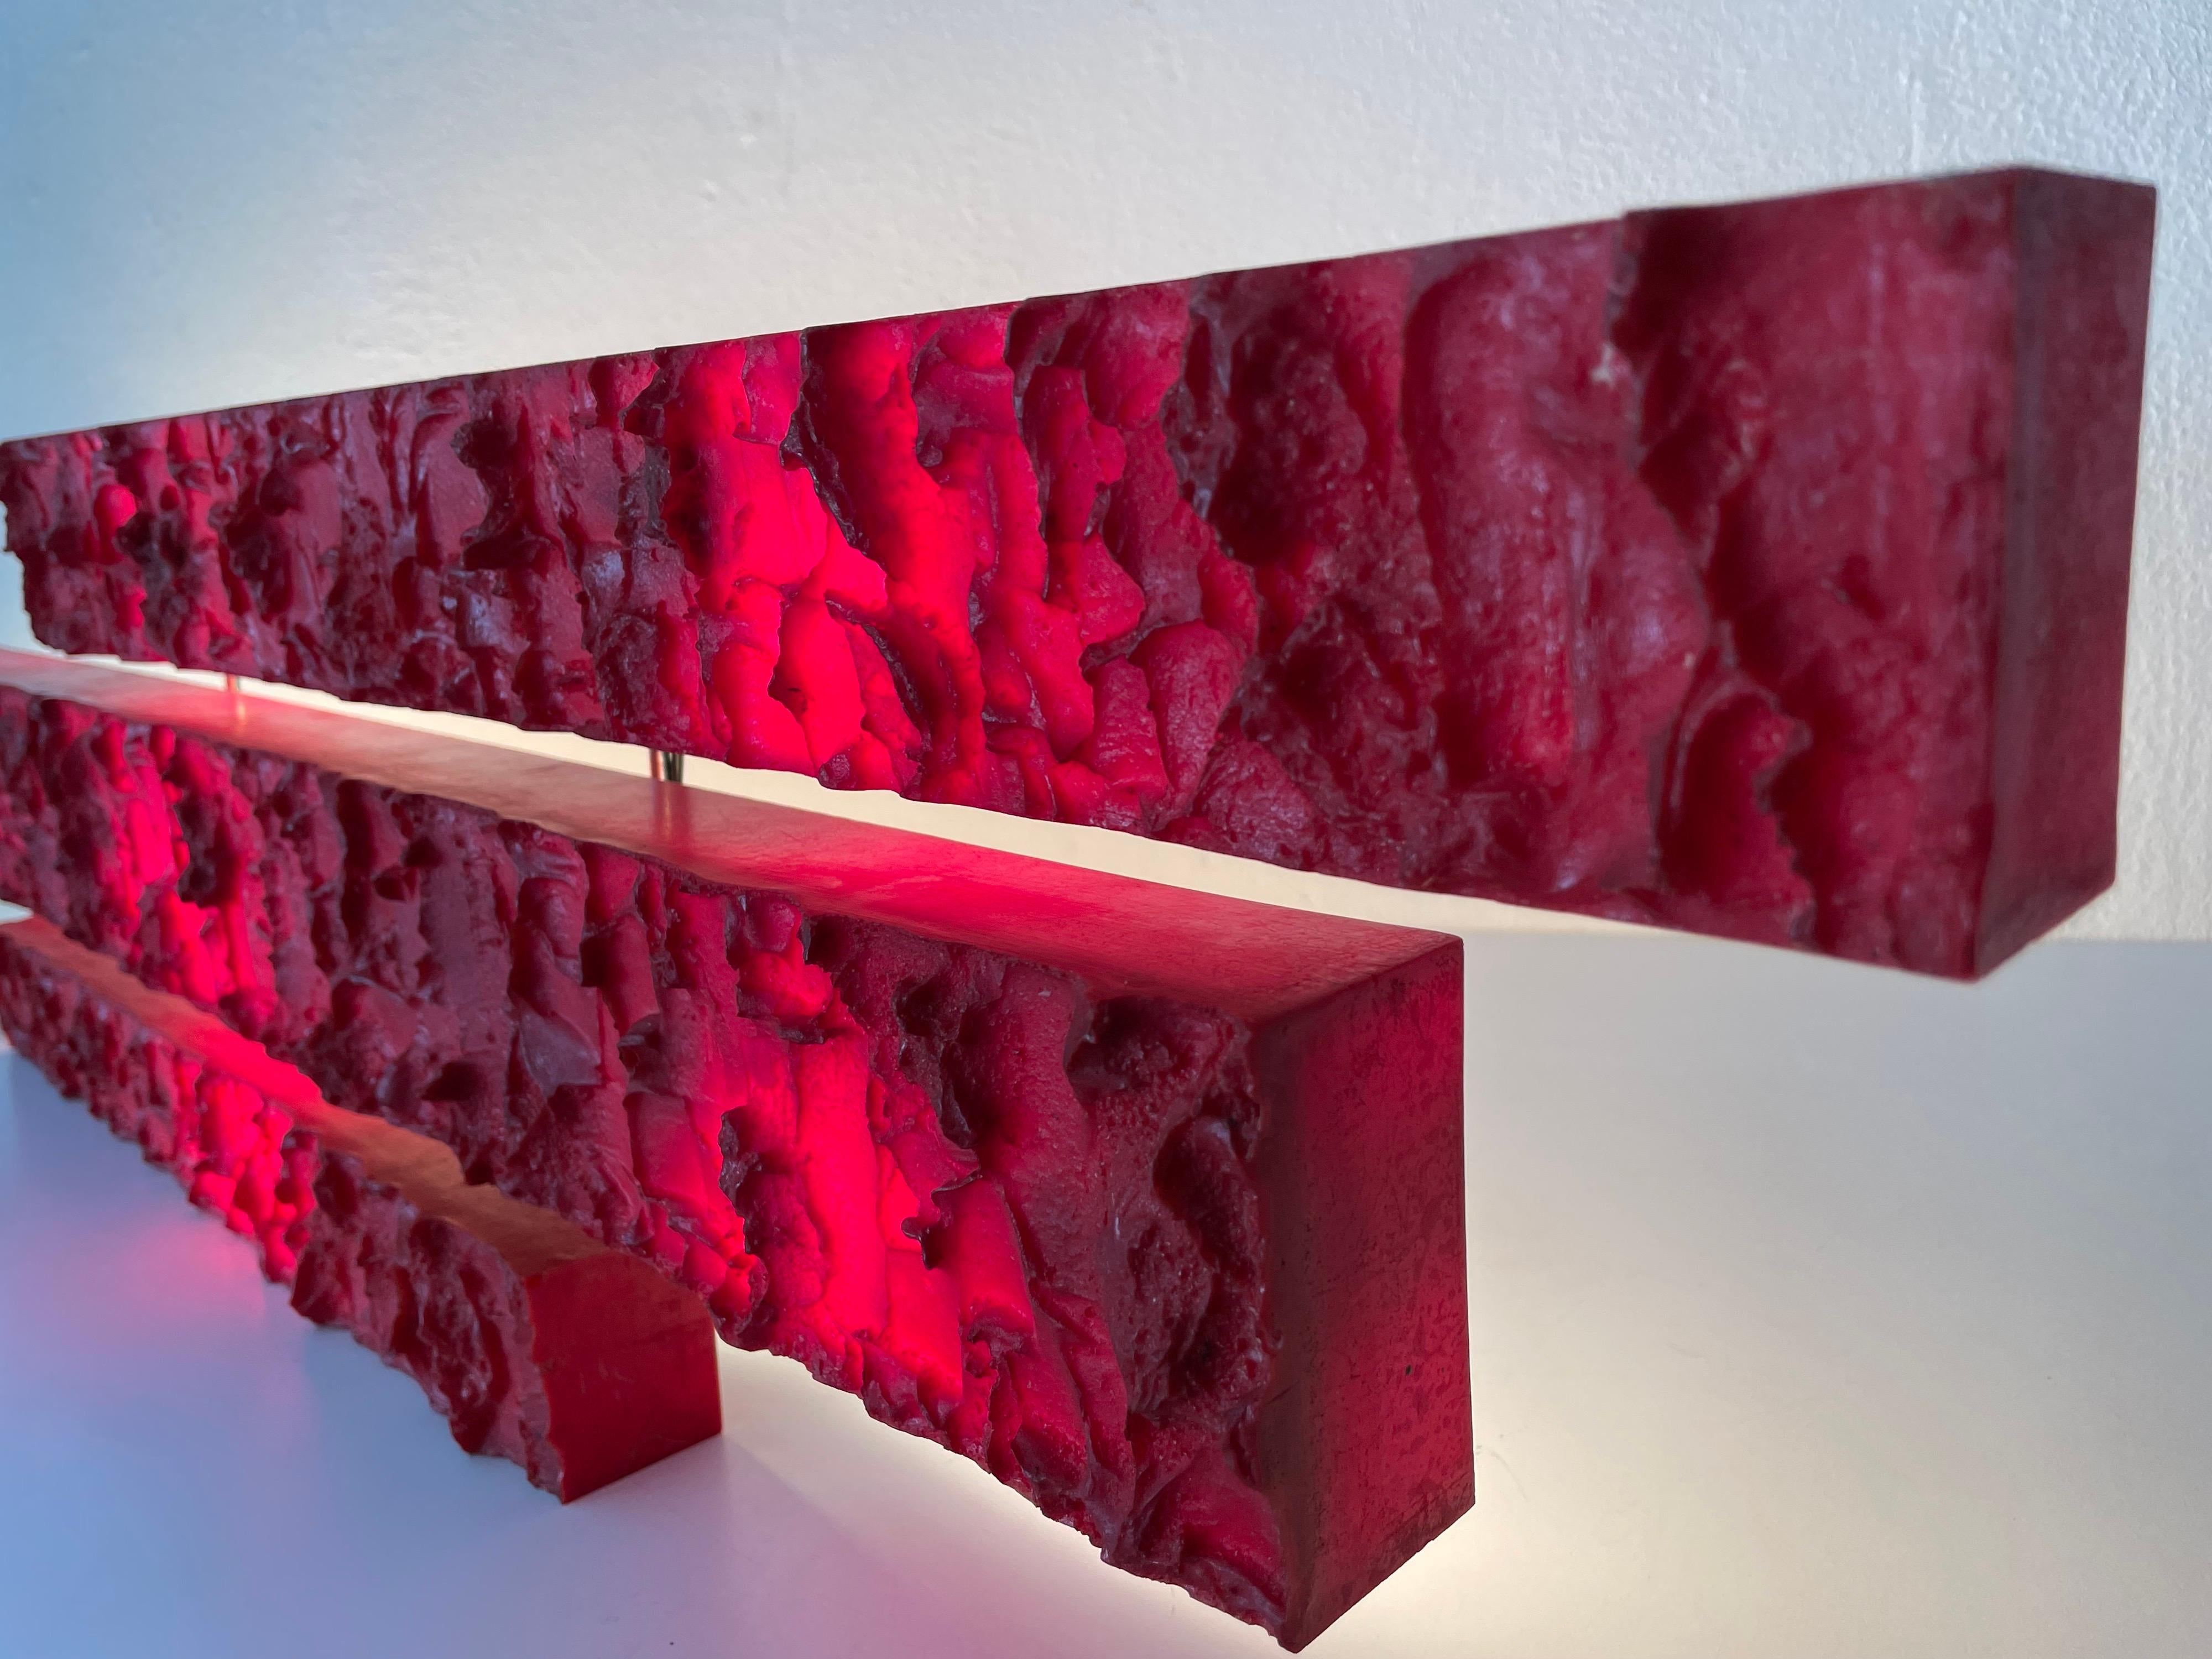 Textured Red Plastic Large Wall Lamp by Uwe Mersch Design, 1970s Germany For Sale 9